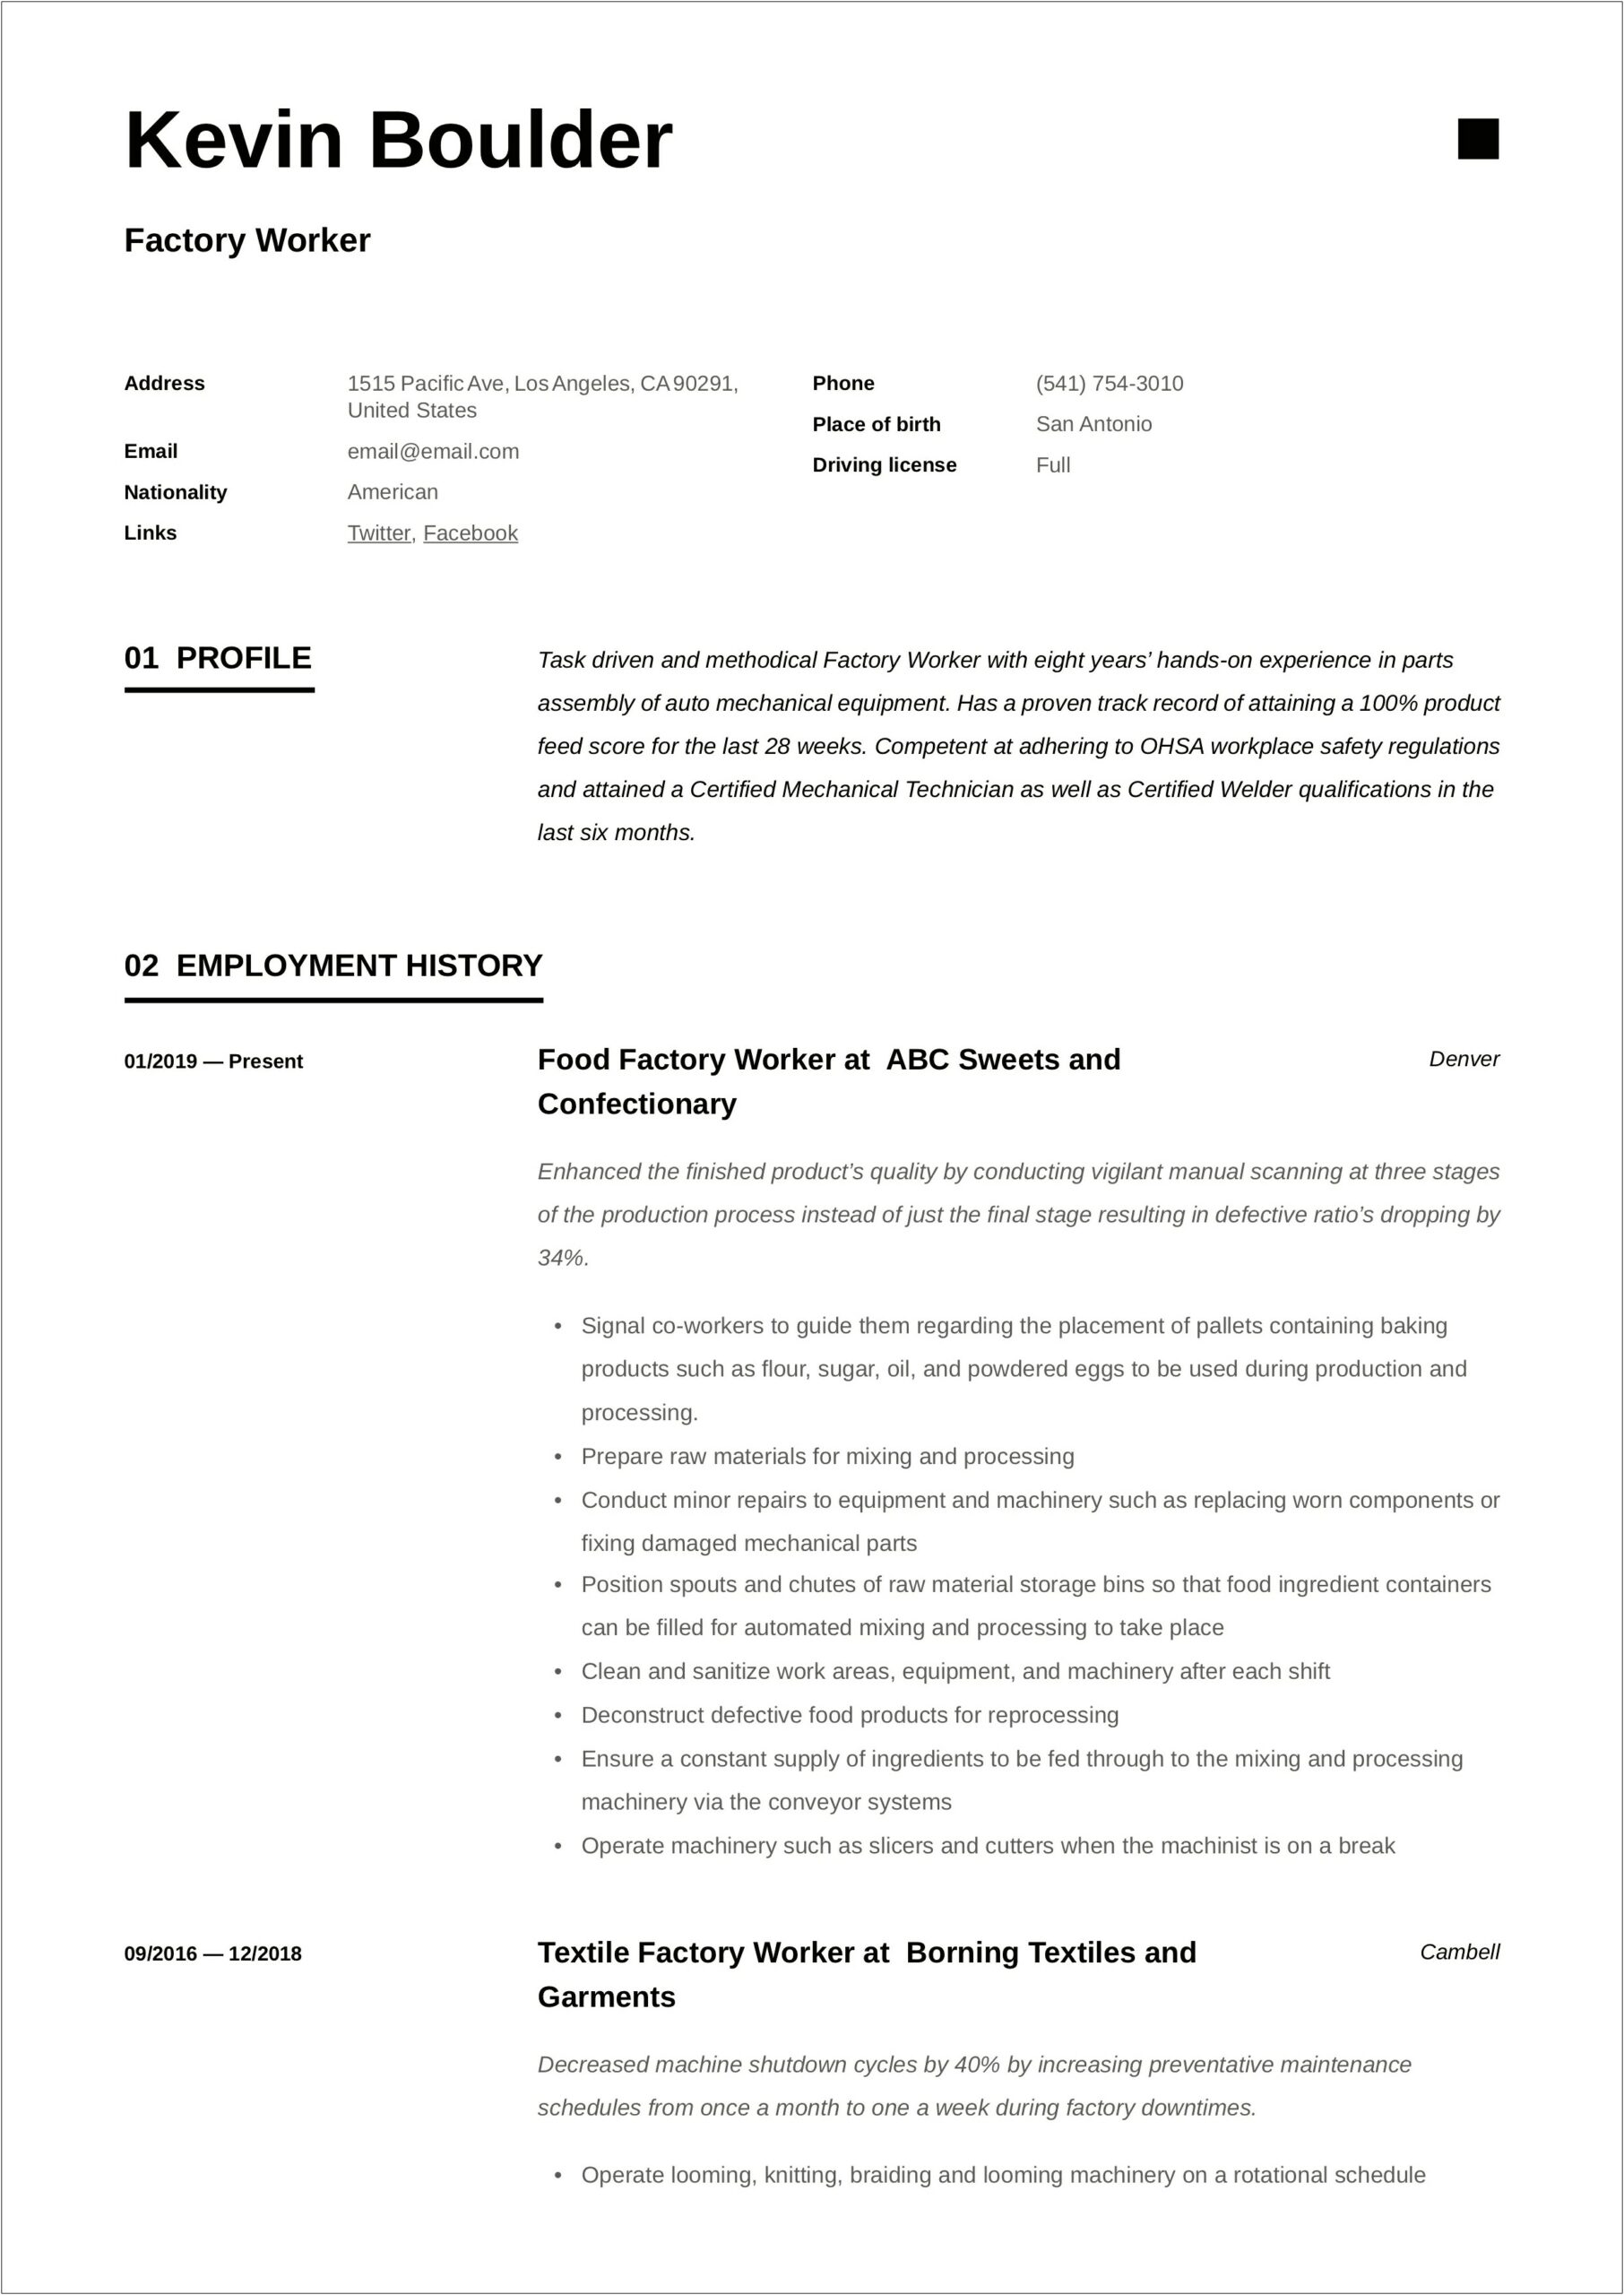 Resume Samples For Factory Employees